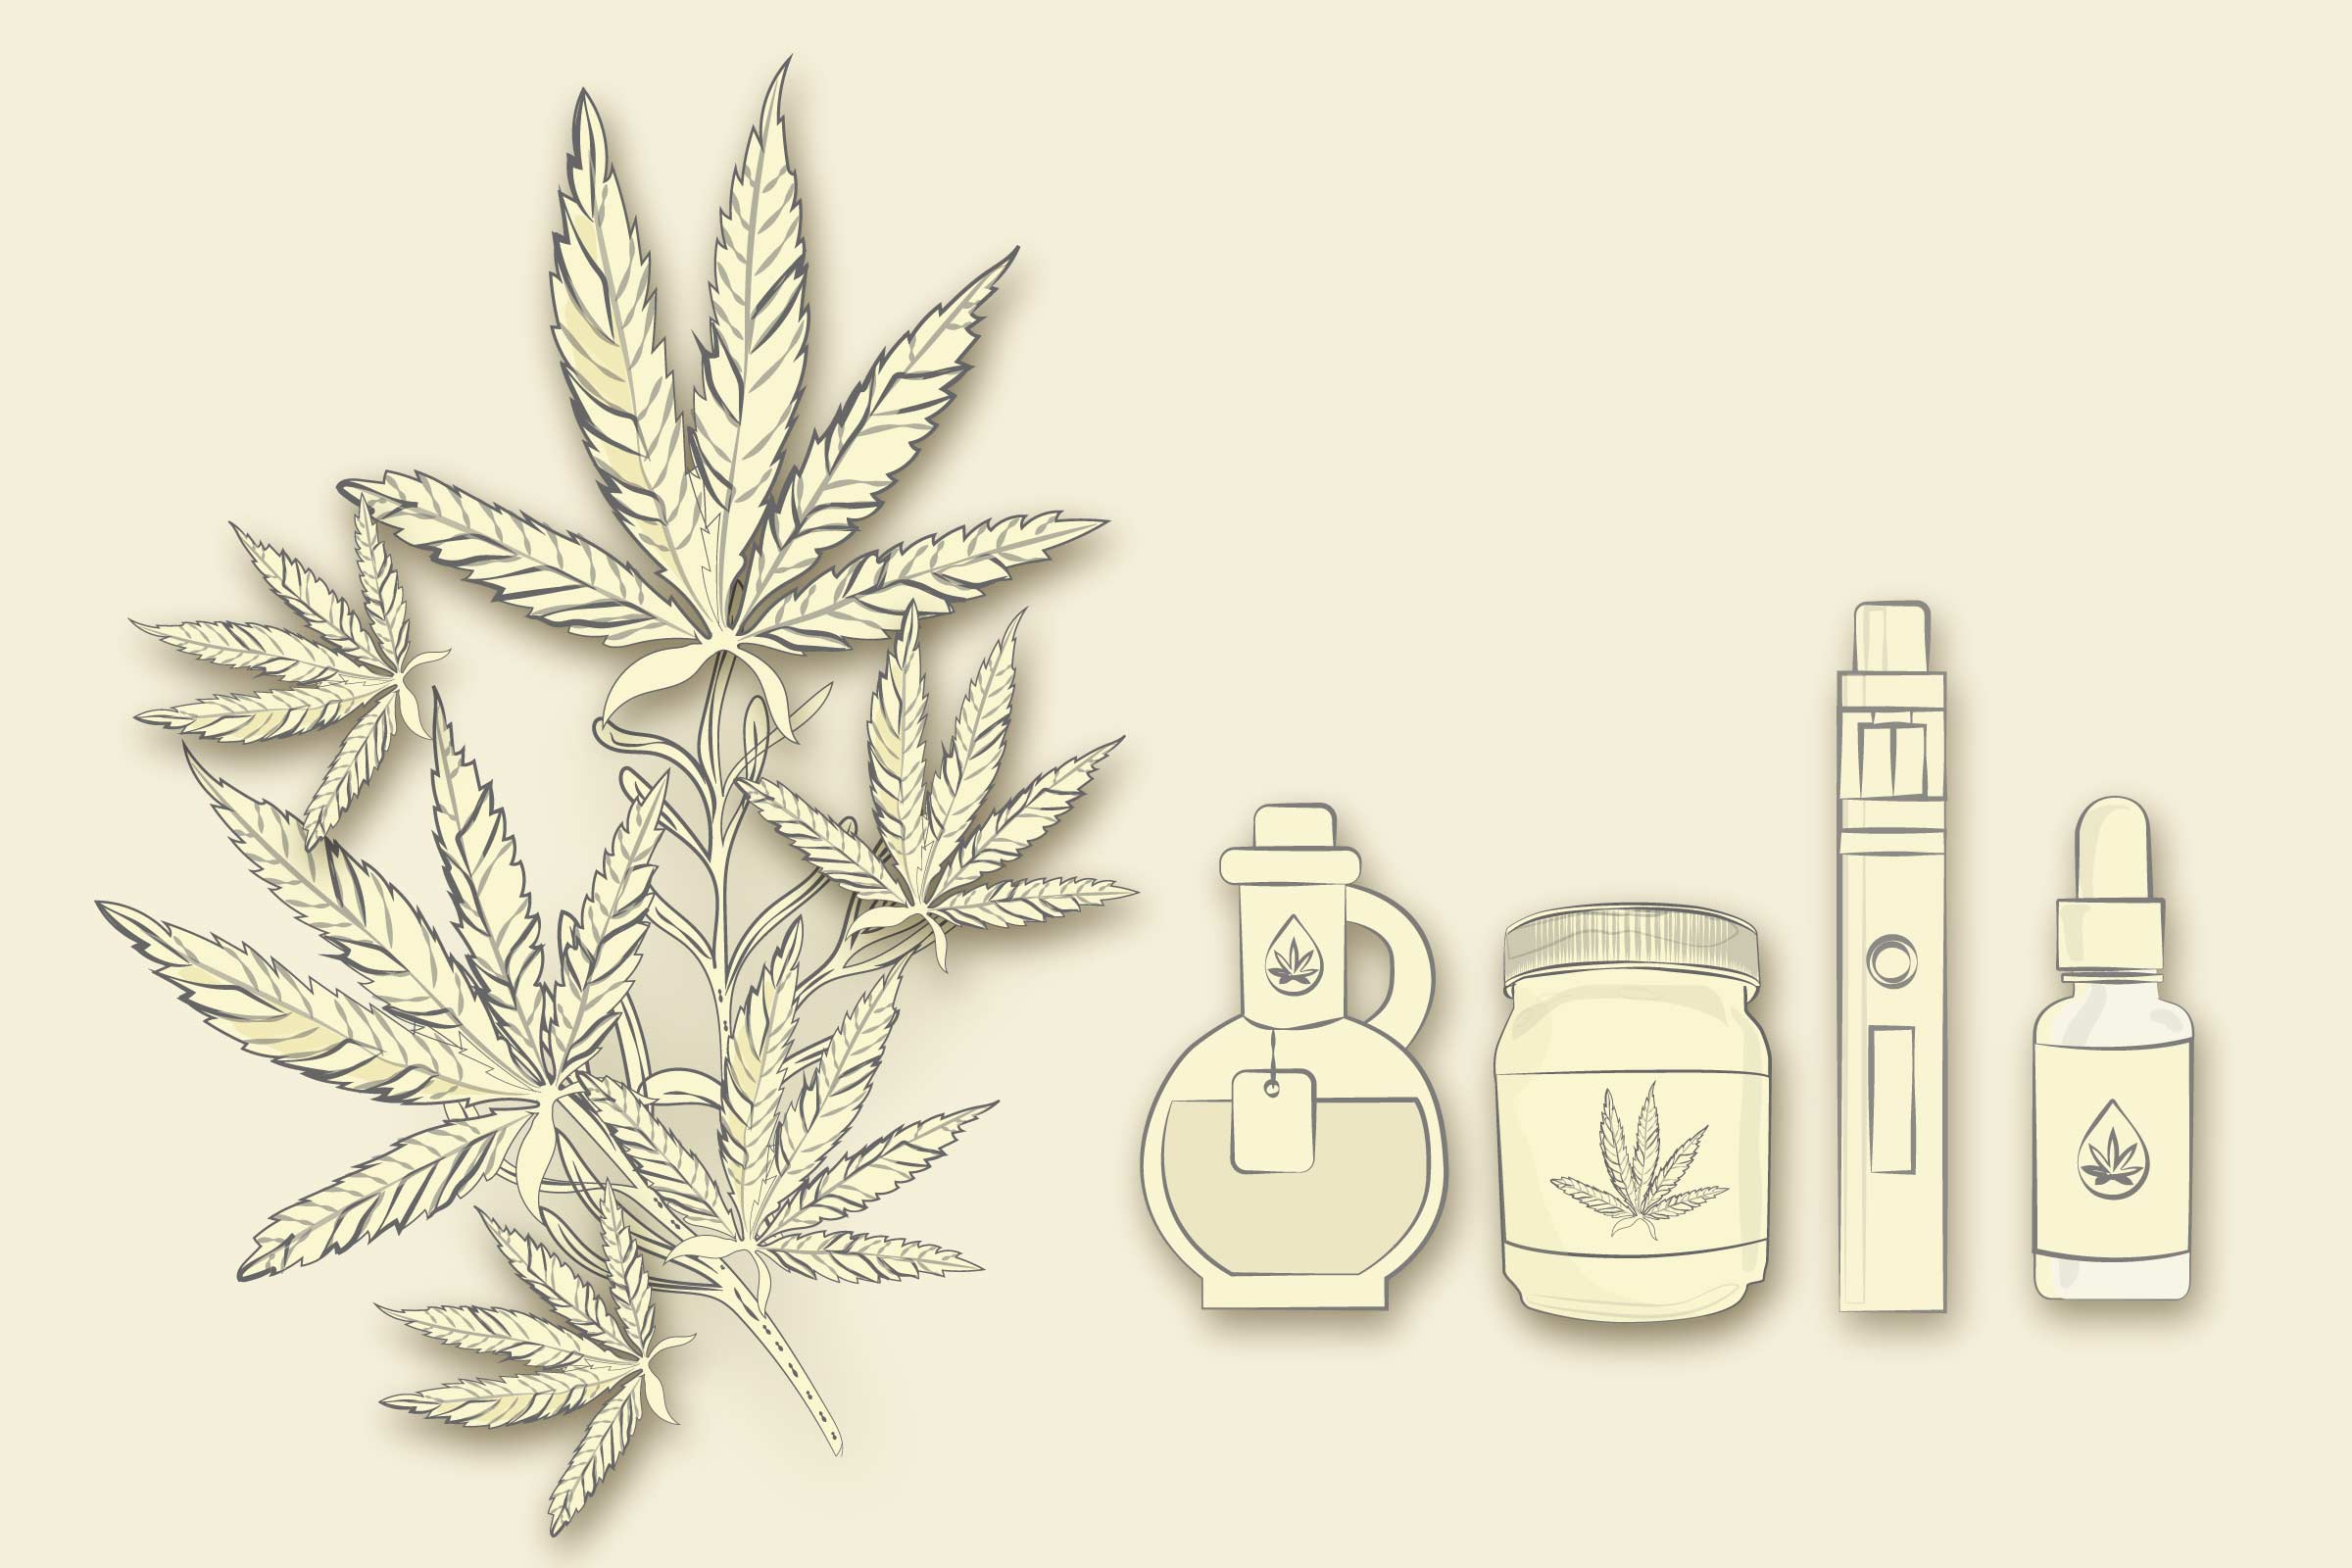 Black and white marijuana leaves cannabis containing bottles and vases